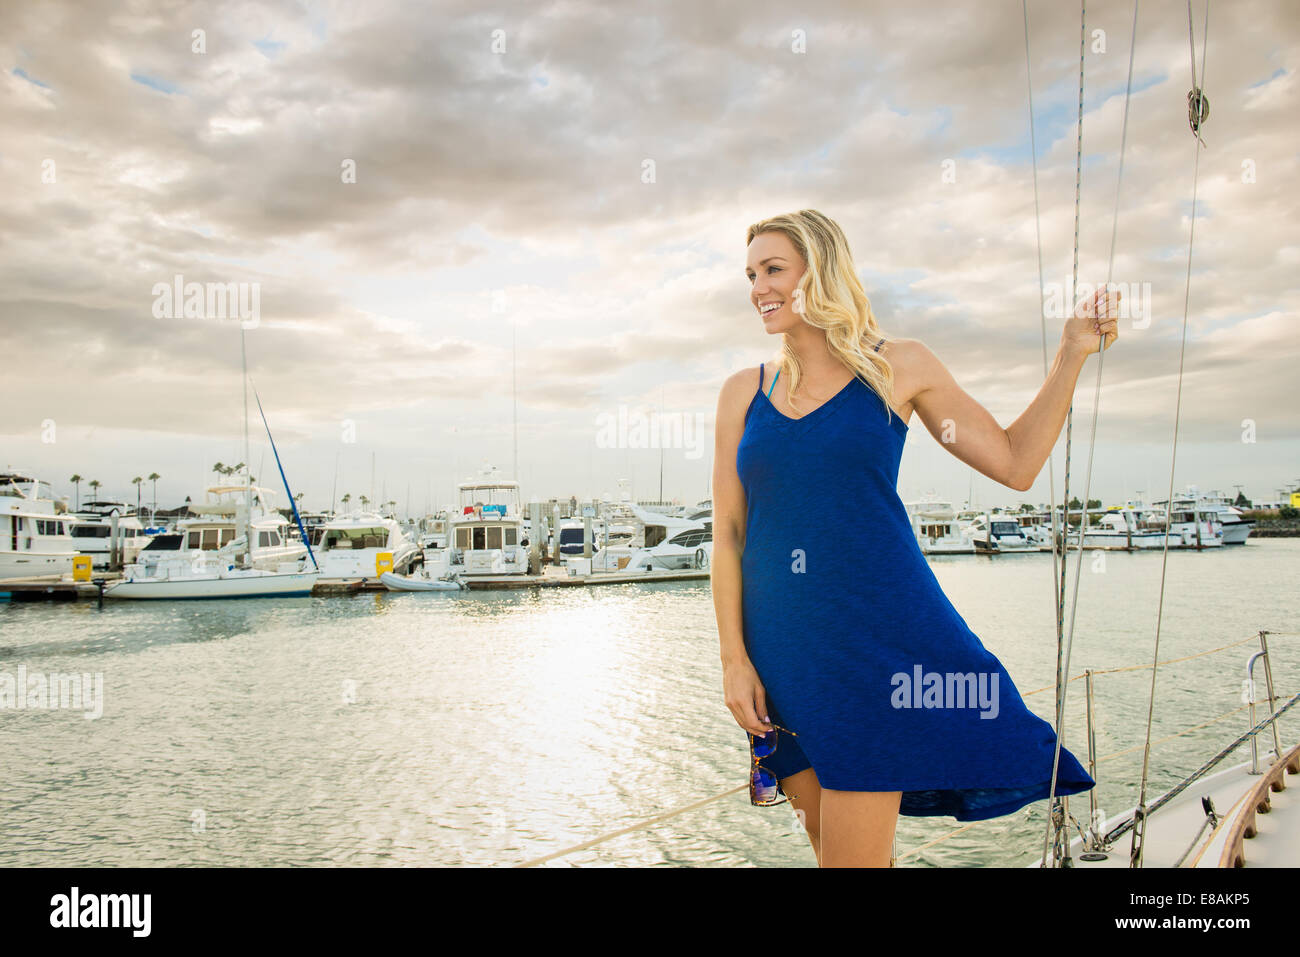 Young woman wearing blue dress on sailing boat, portrait Stock Photo